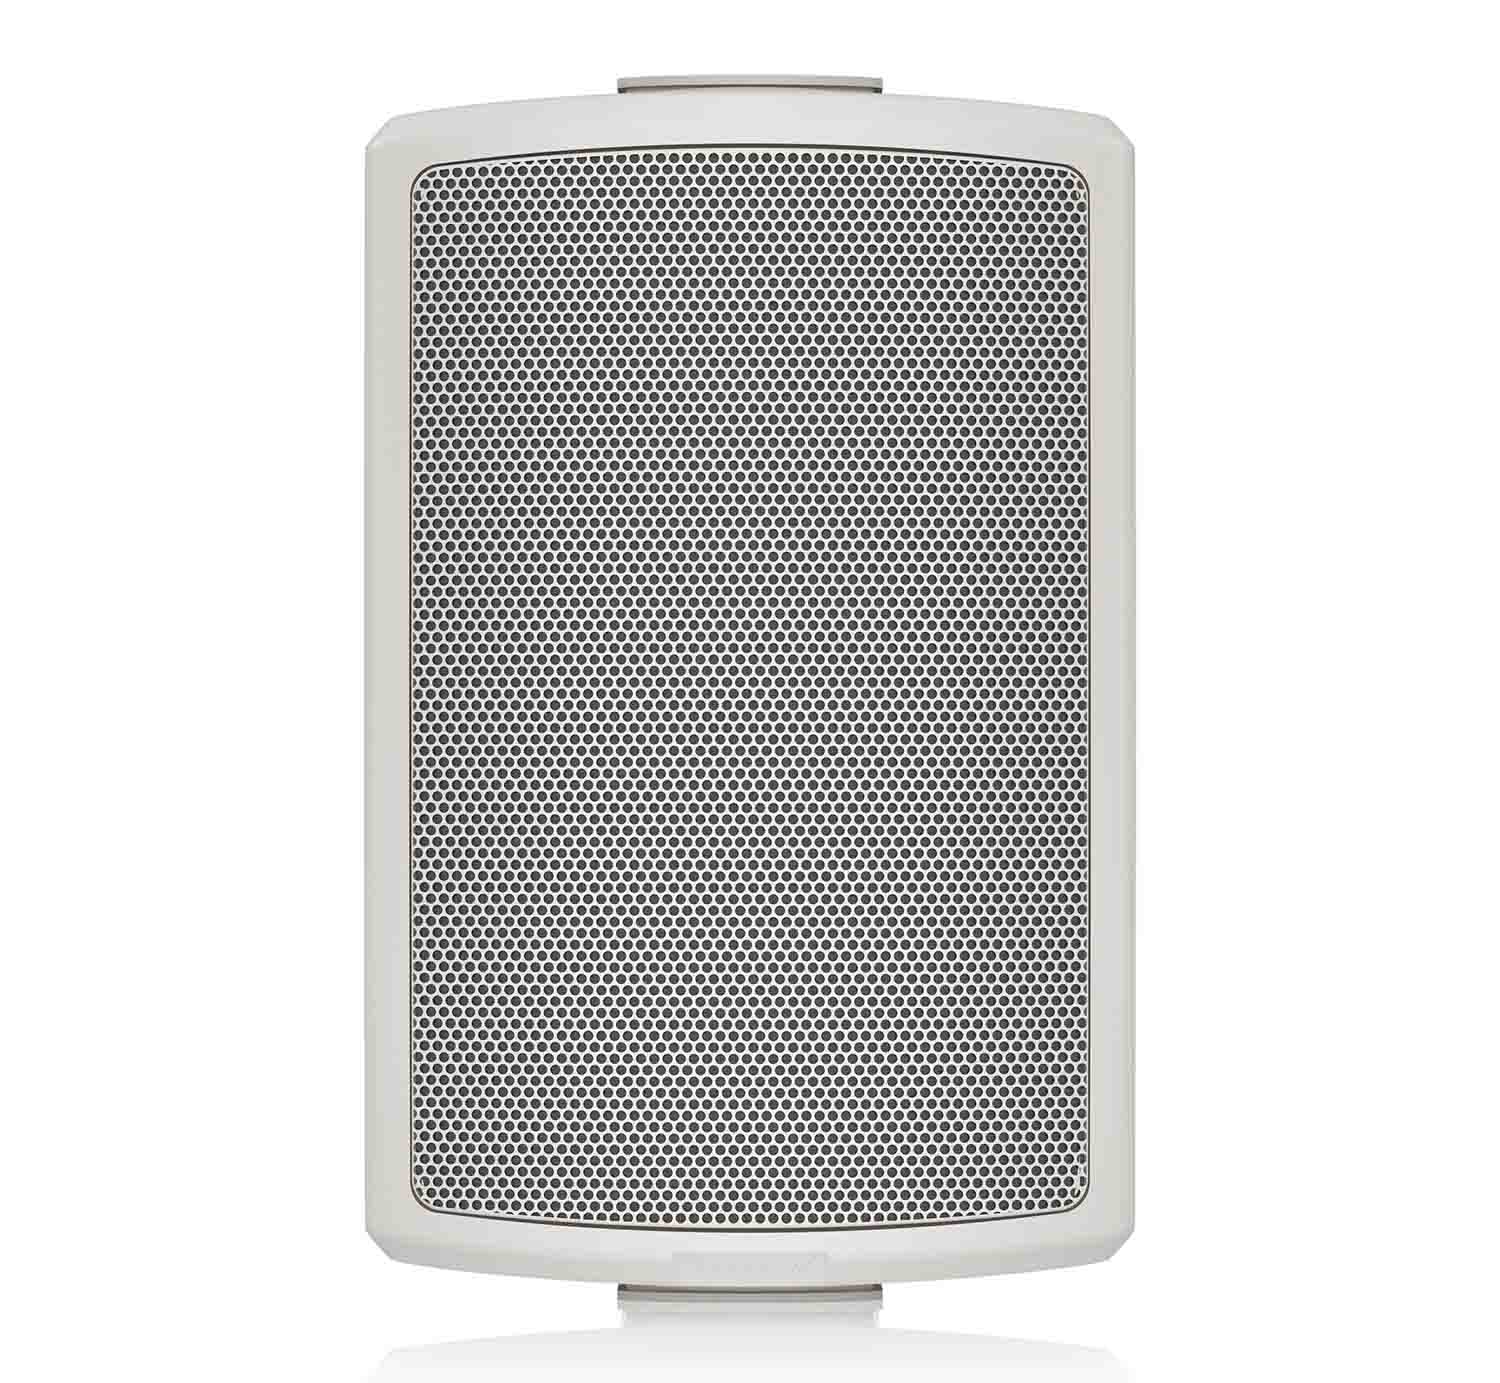 Tannoy AMS 5ICT LS-WH 5-Inch ICT Surface-Mount Loudspeaker for Life Safety Installation Applications - White - Hollywood DJ